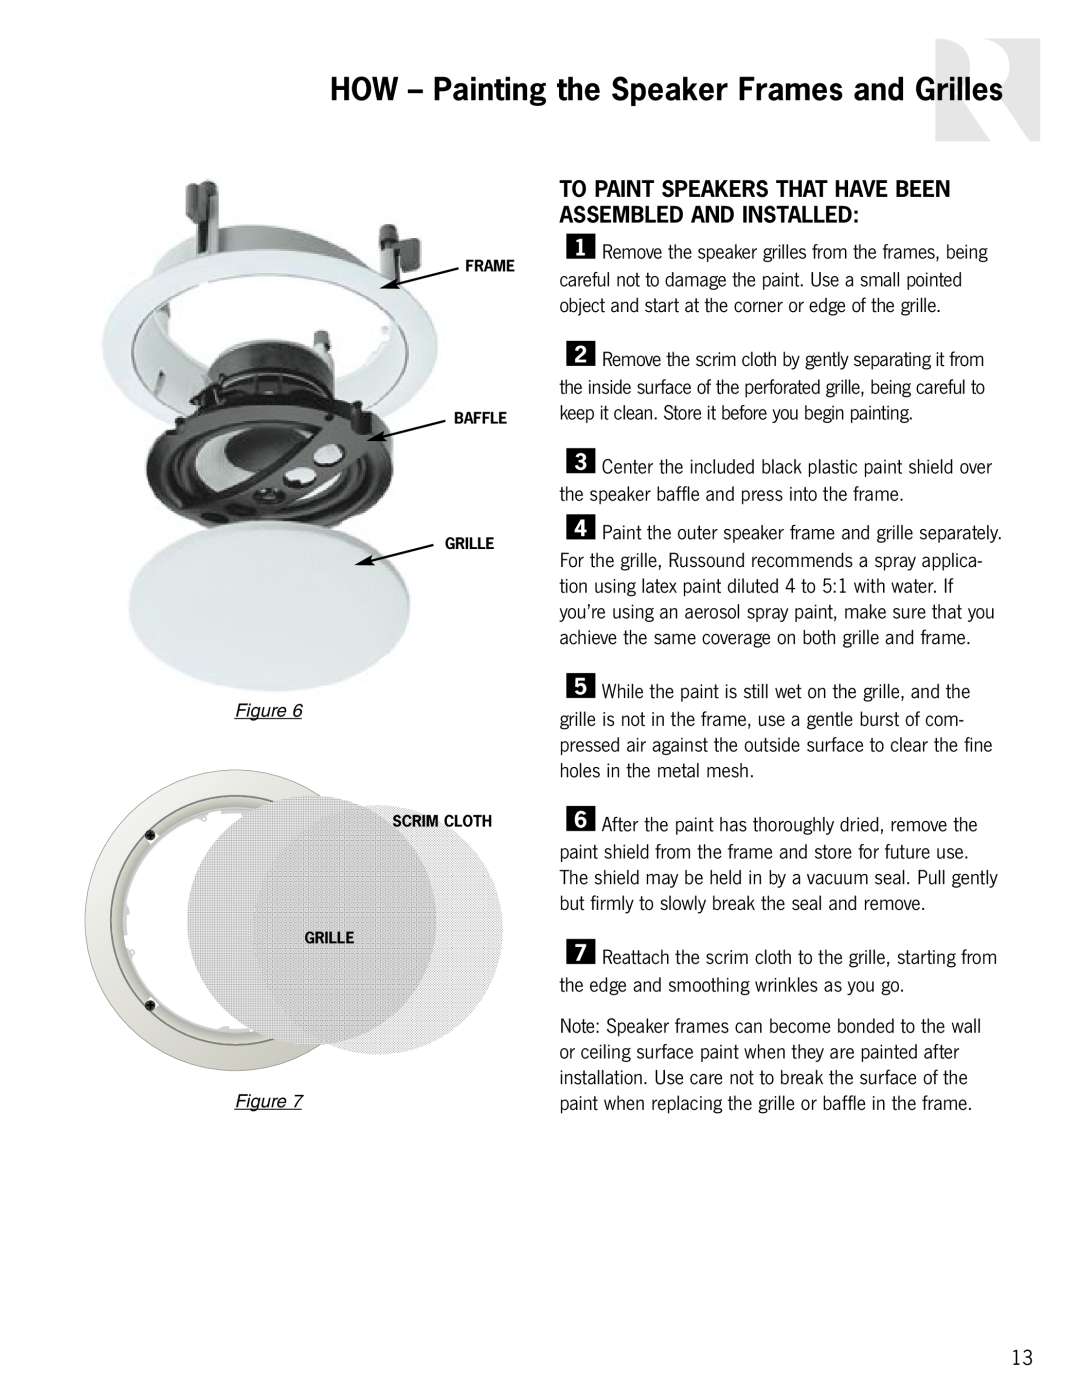 Russound In-Ceiling speaker owner manual HOW - Painting the Speaker Frames and Grilles 